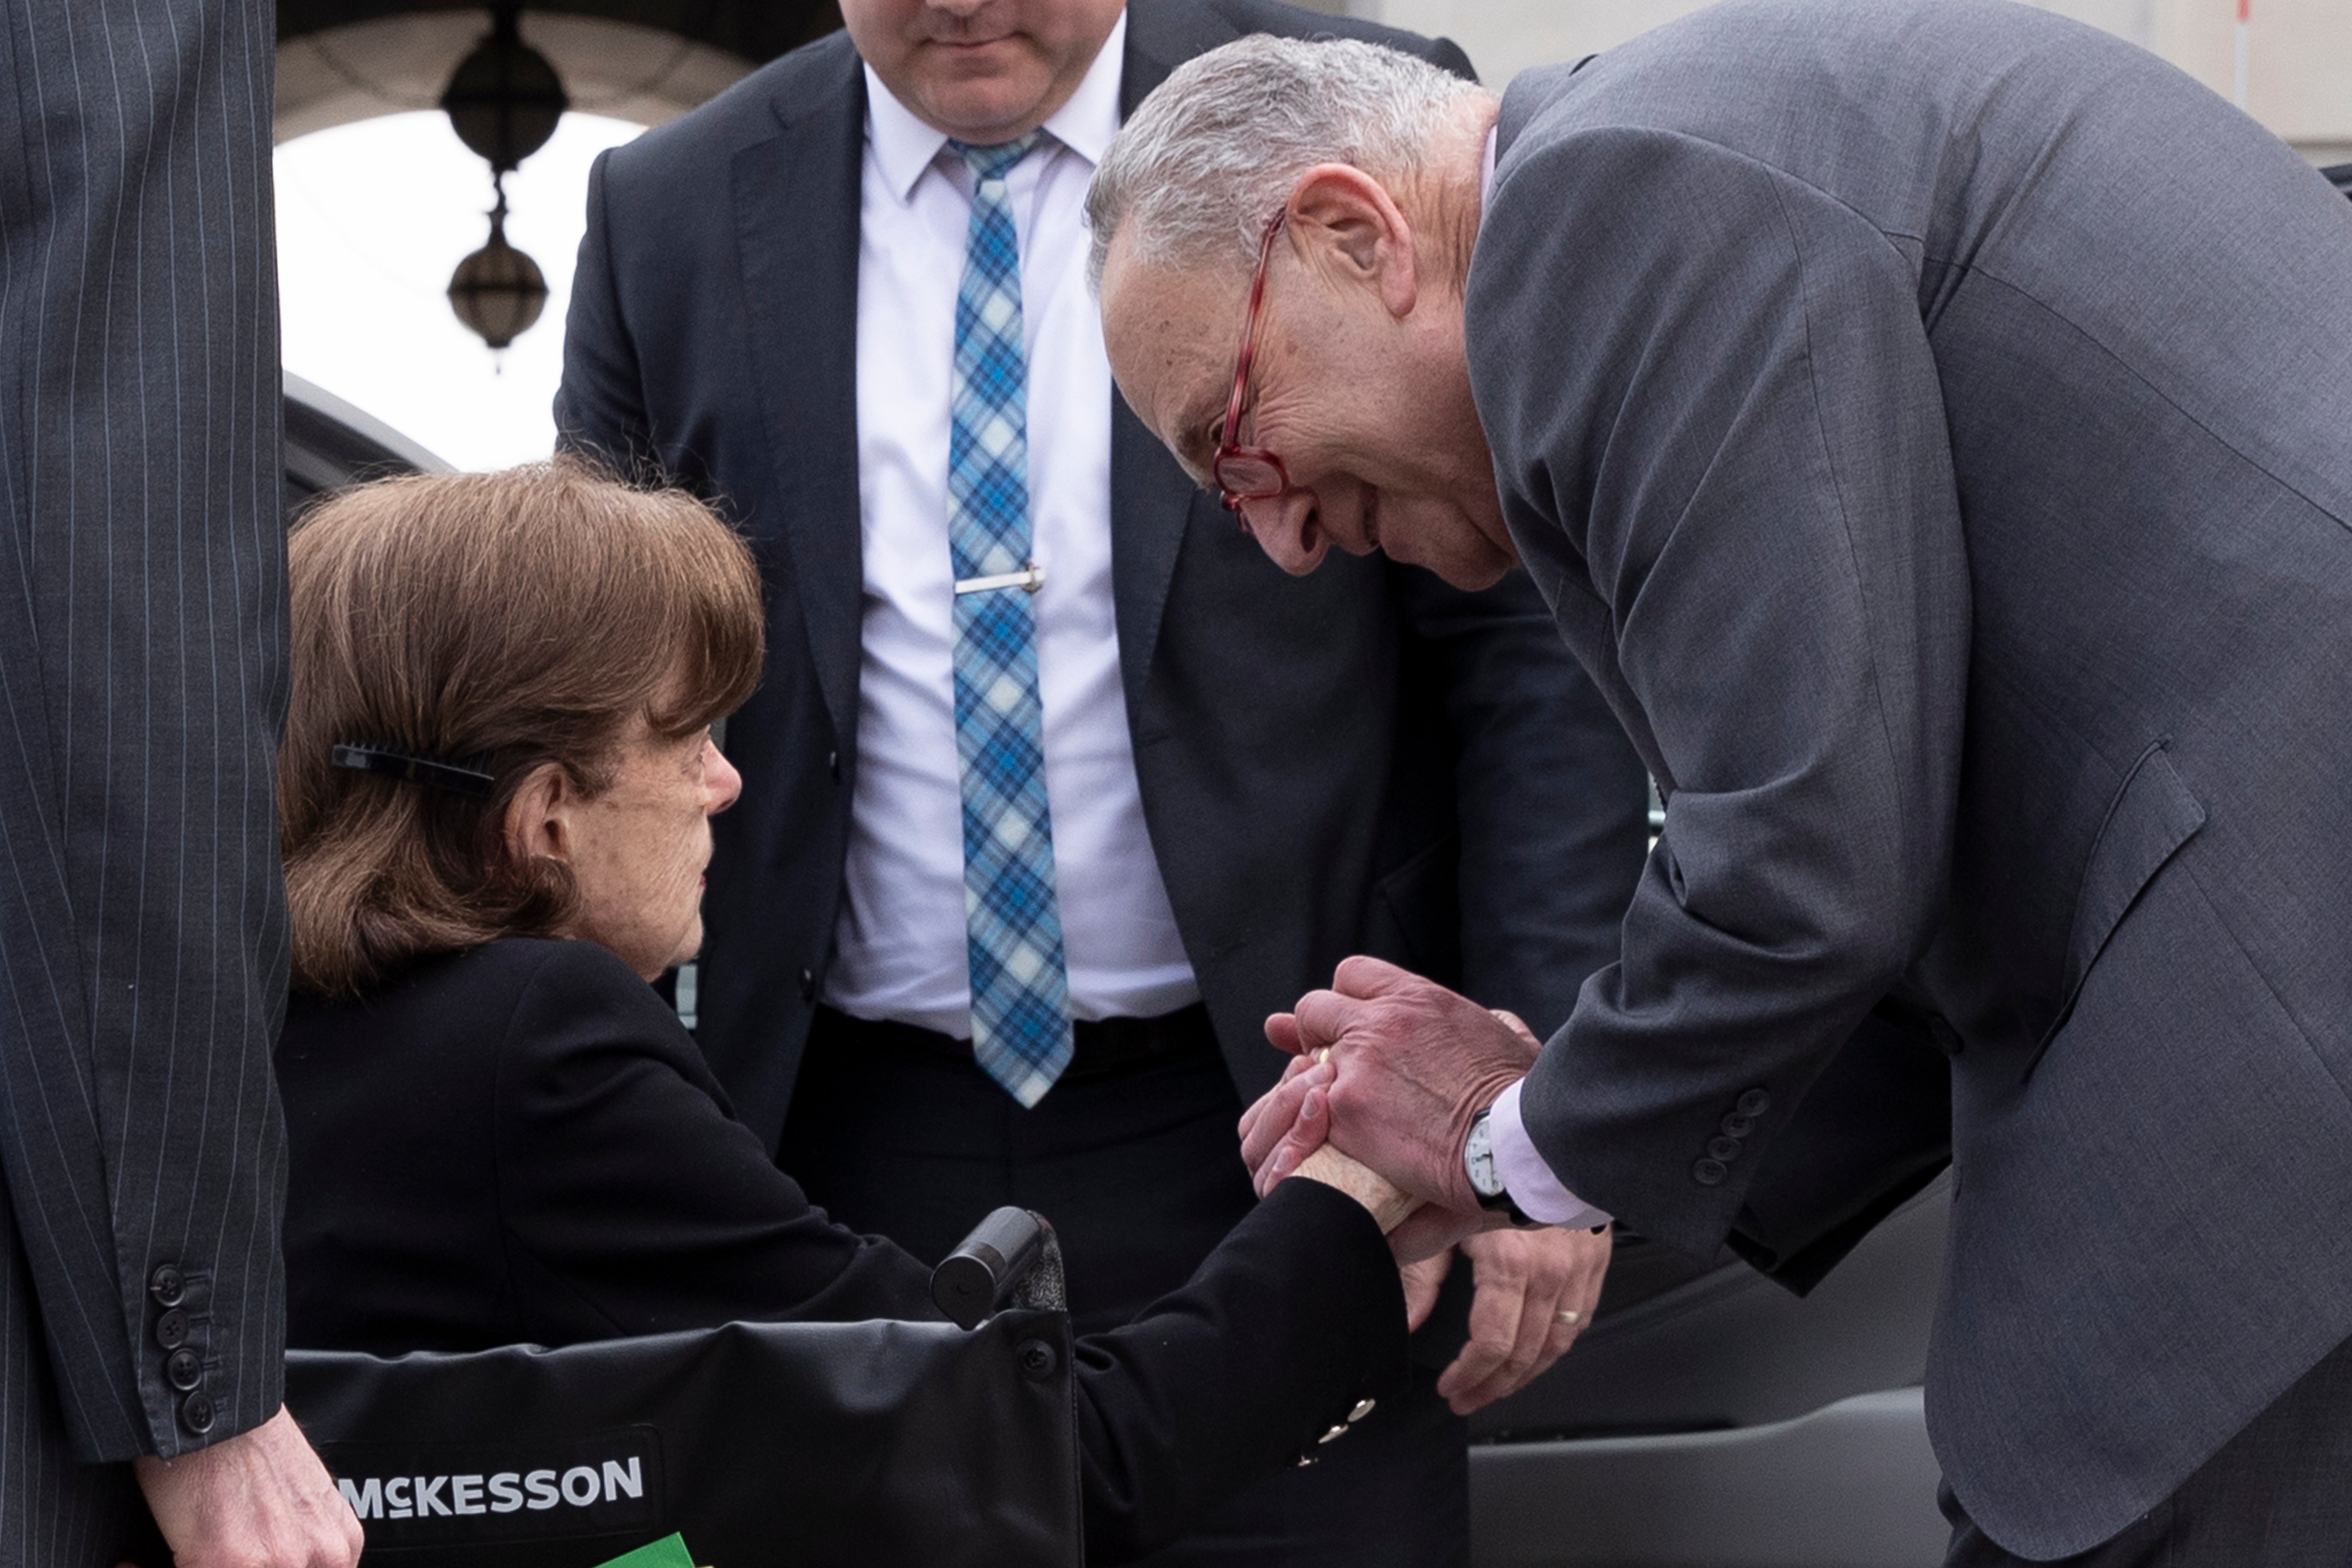 Democratic Senator from California Dianne Feinstein is greeted by Senate Majority Leader Chuck Schumer on 10 May 2023